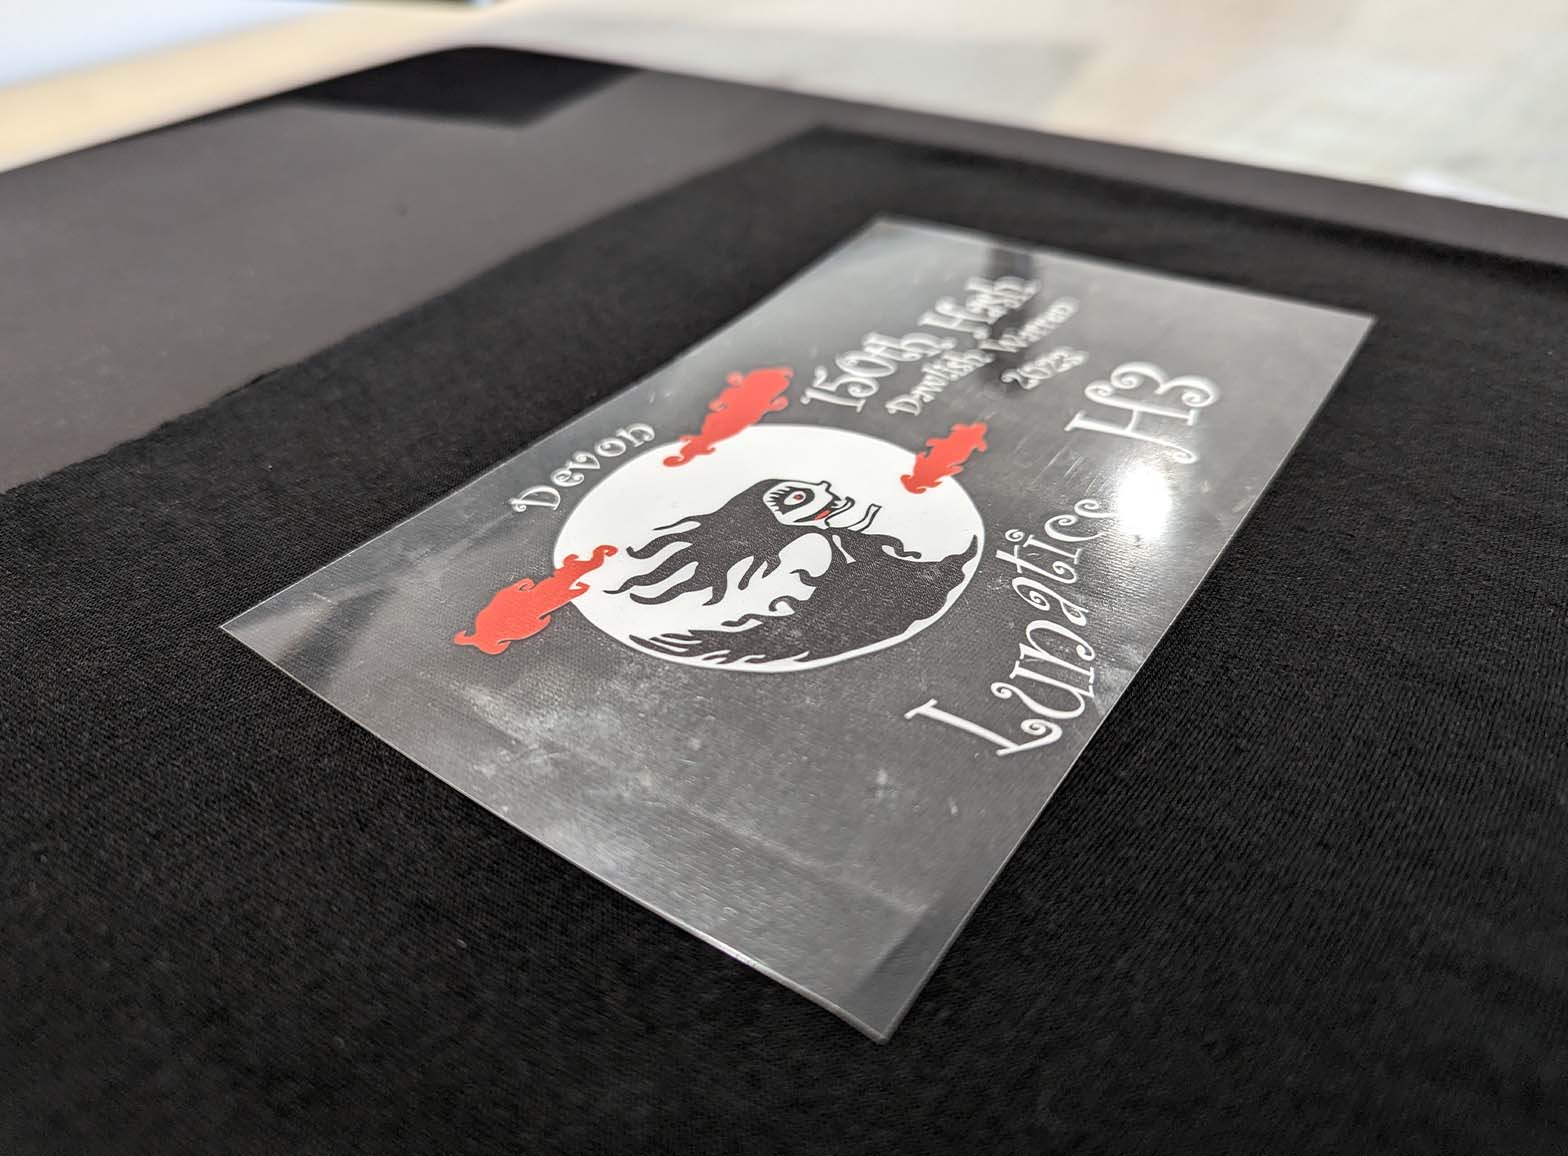 A photograph of the printing process for a job for the Devon Lunatics, by Clothing Your Way in South Devon.